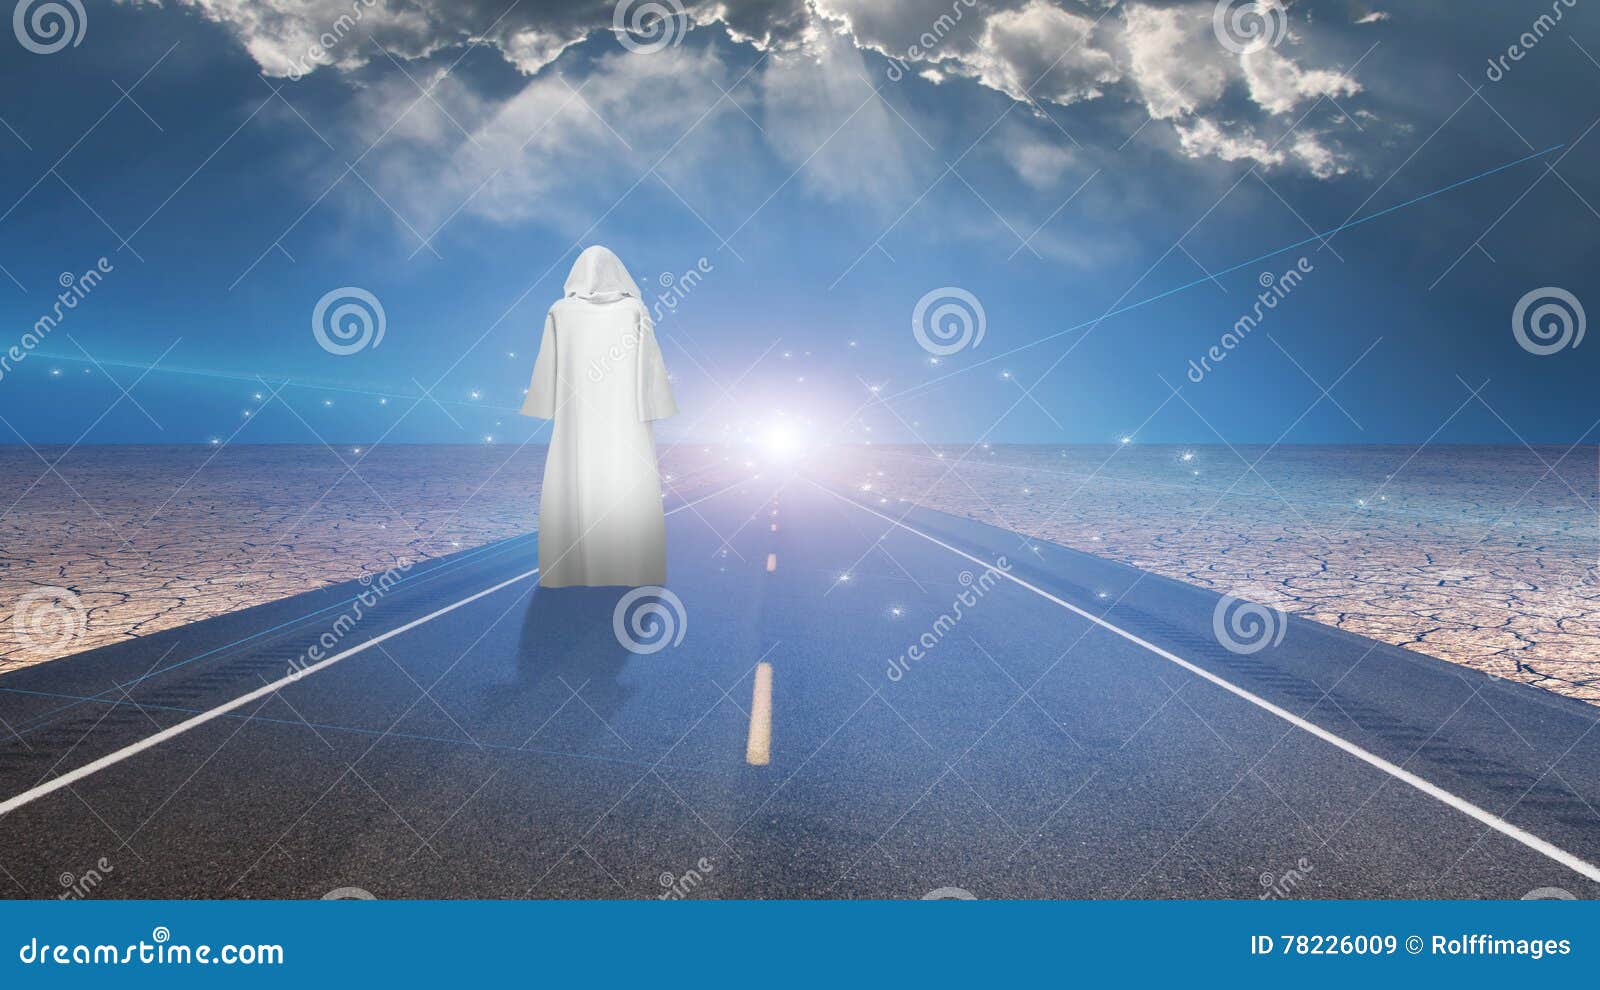 white robed man and road